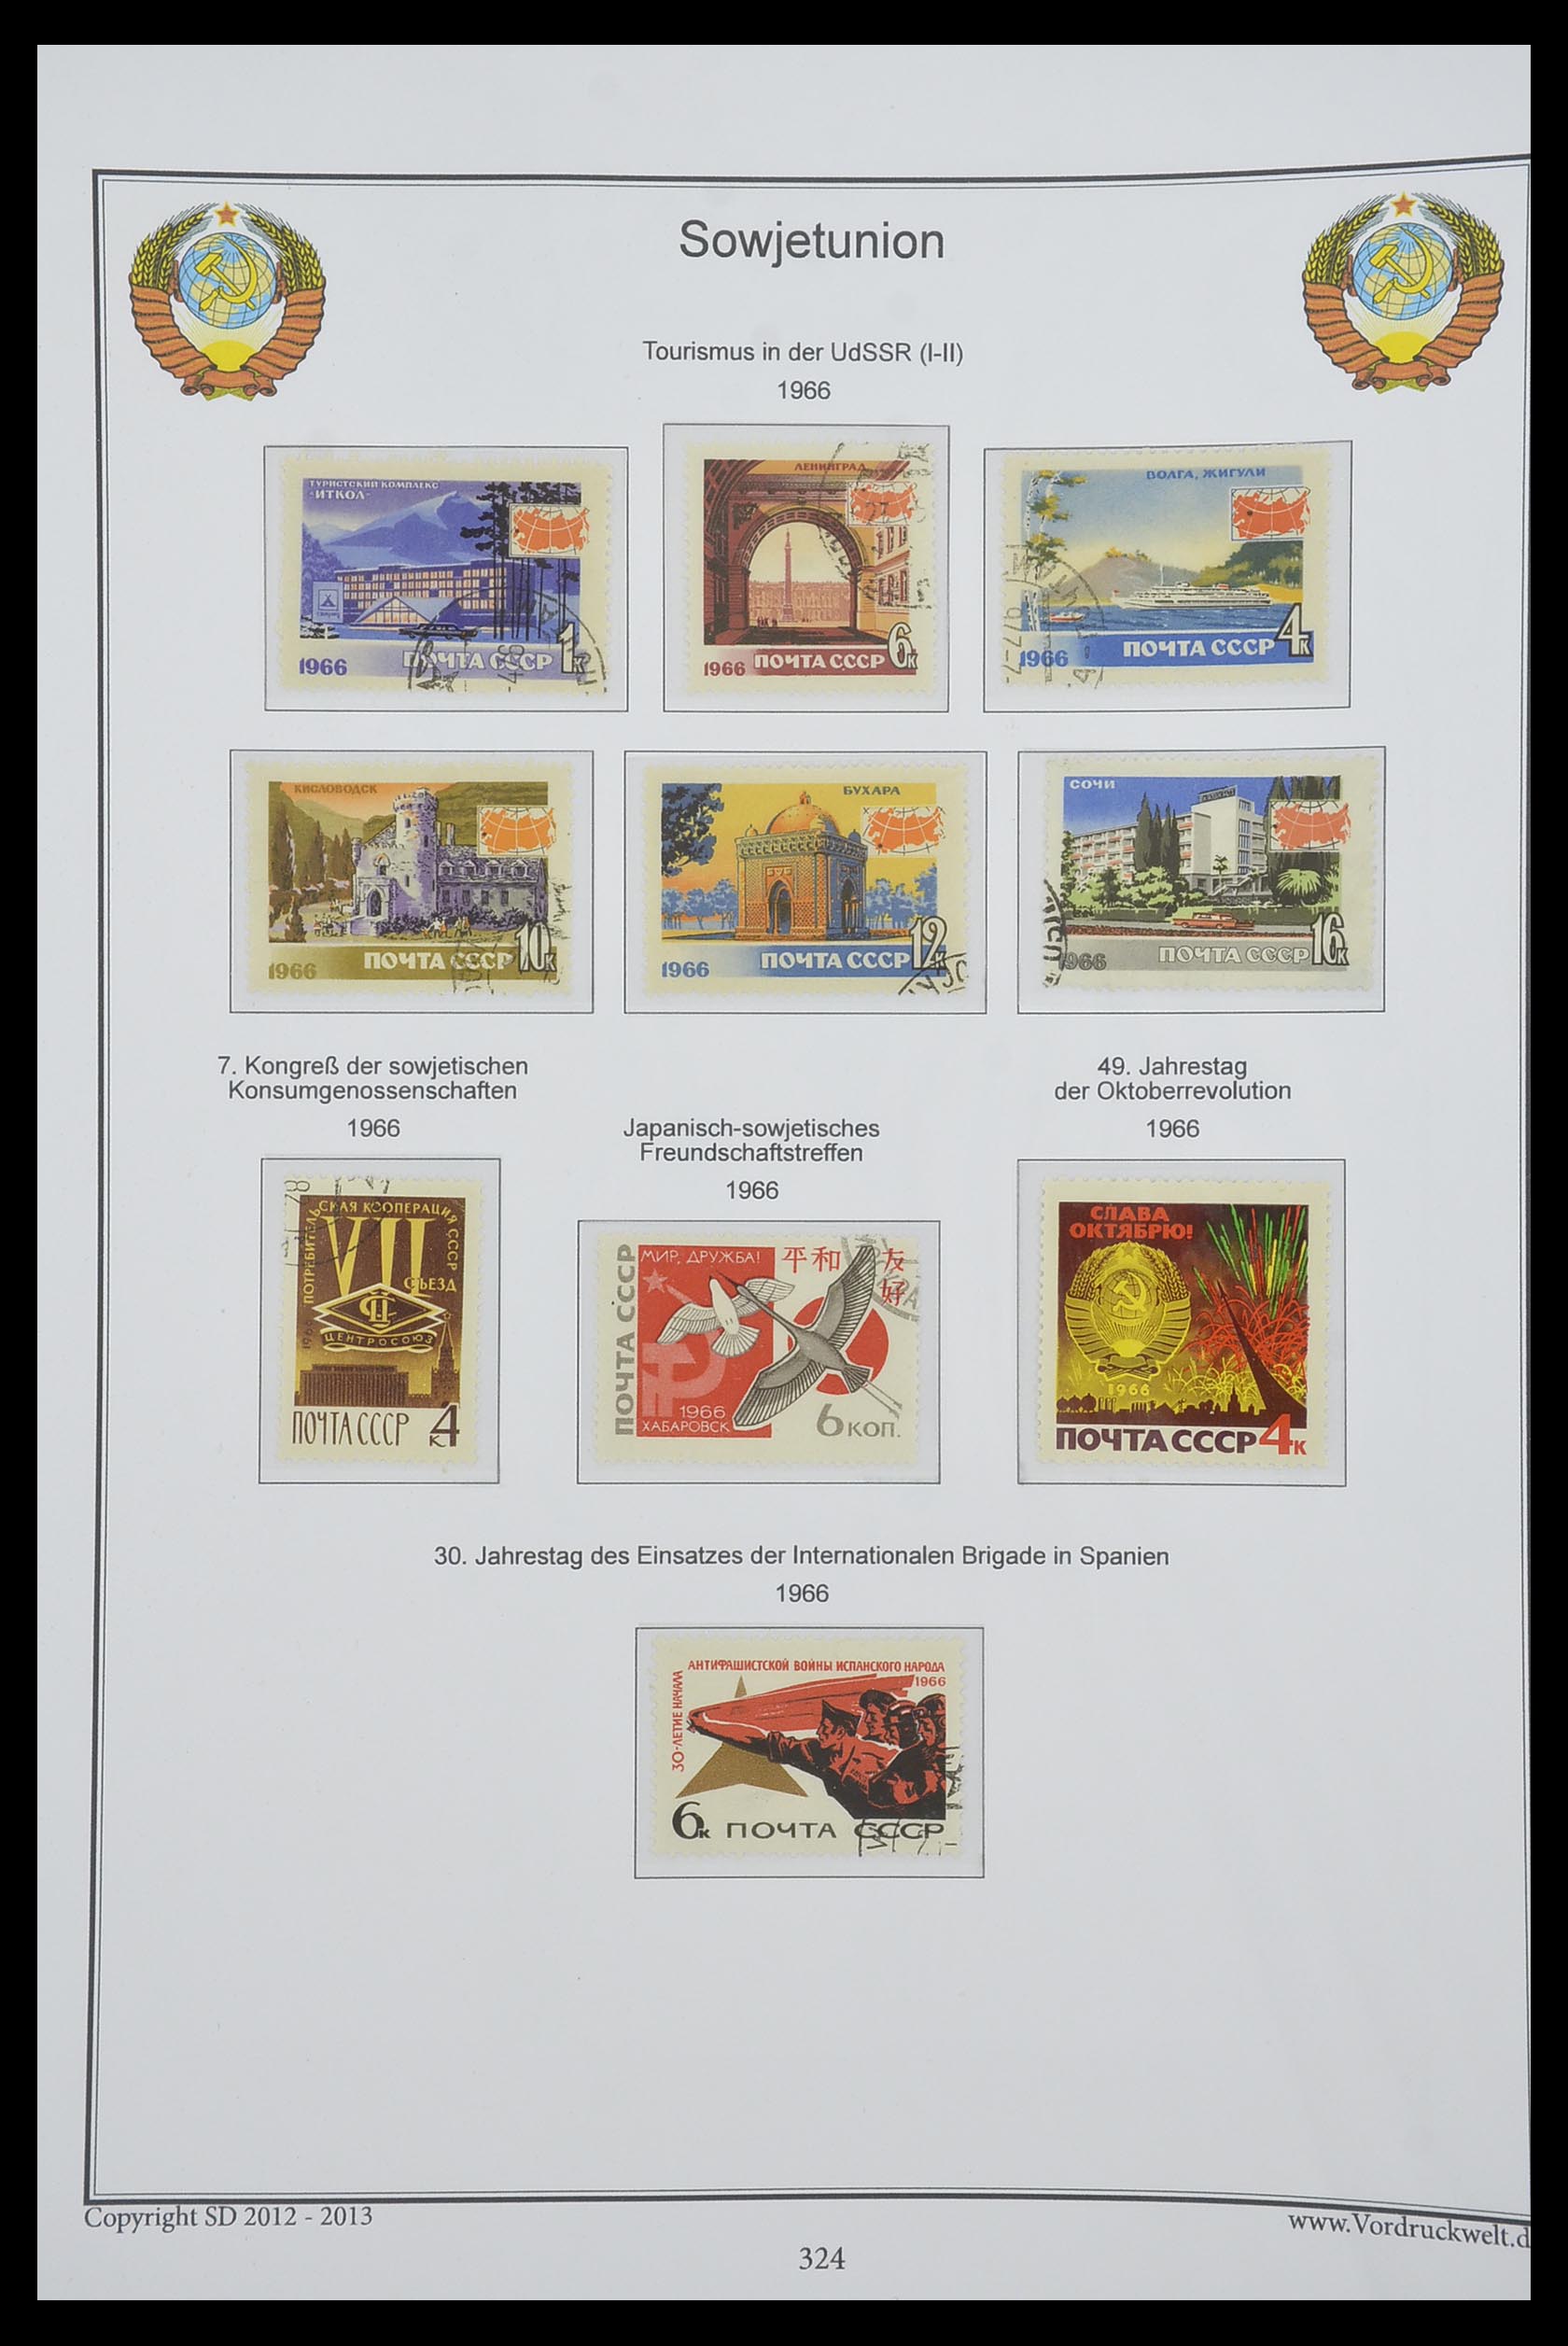 33974 326 - Stamp collection 33974 Russia 1858-1998.